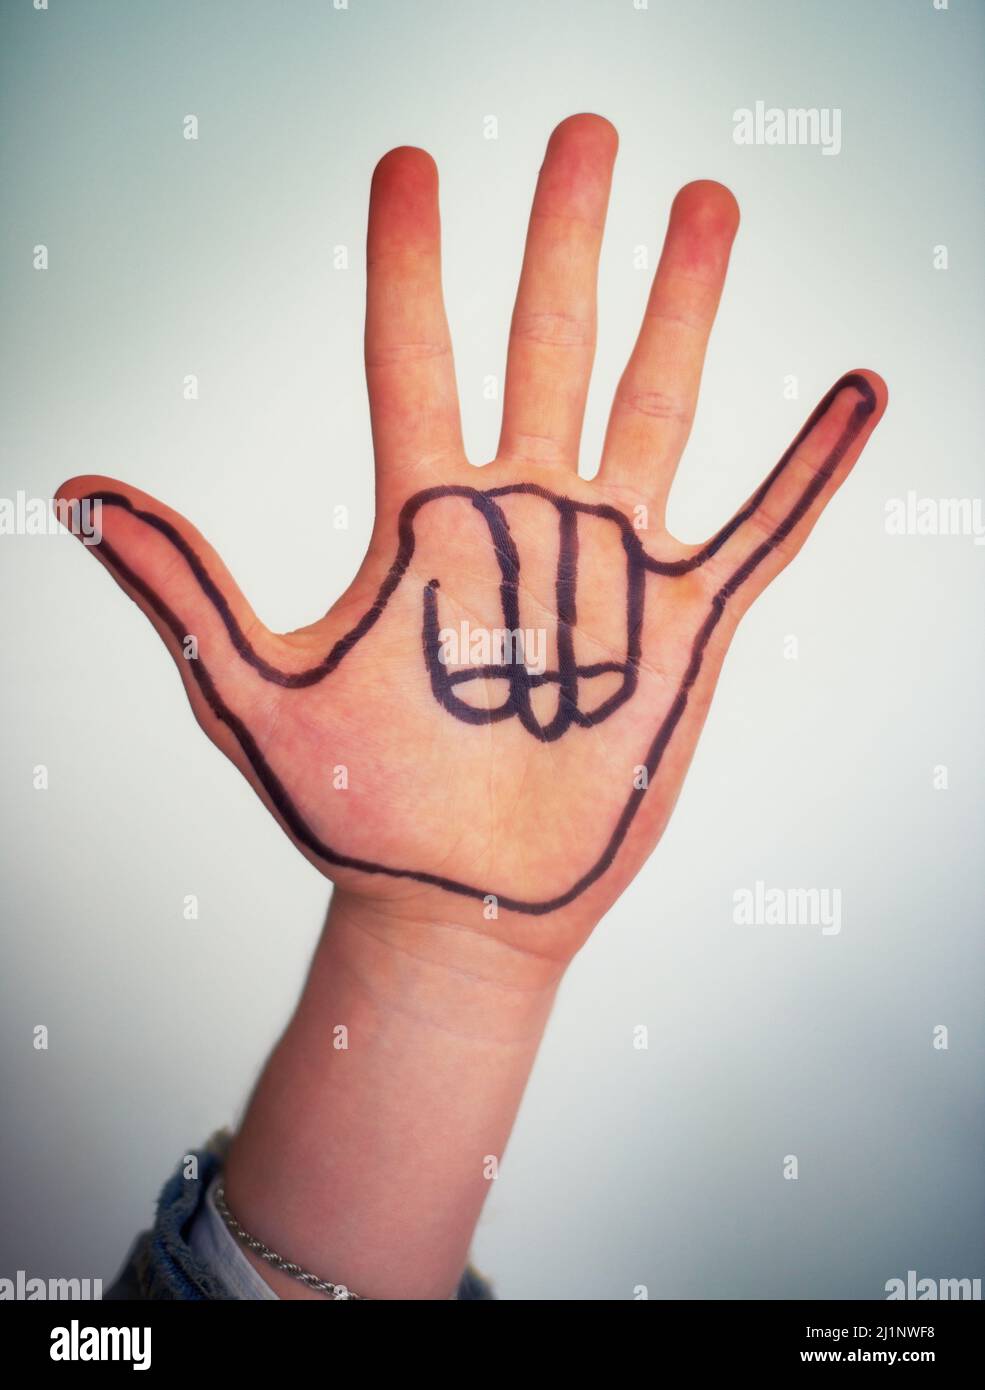 No worries. Cropped view of a male hand with a Hawaiian shaka gesture drawn on it. Stock Photo